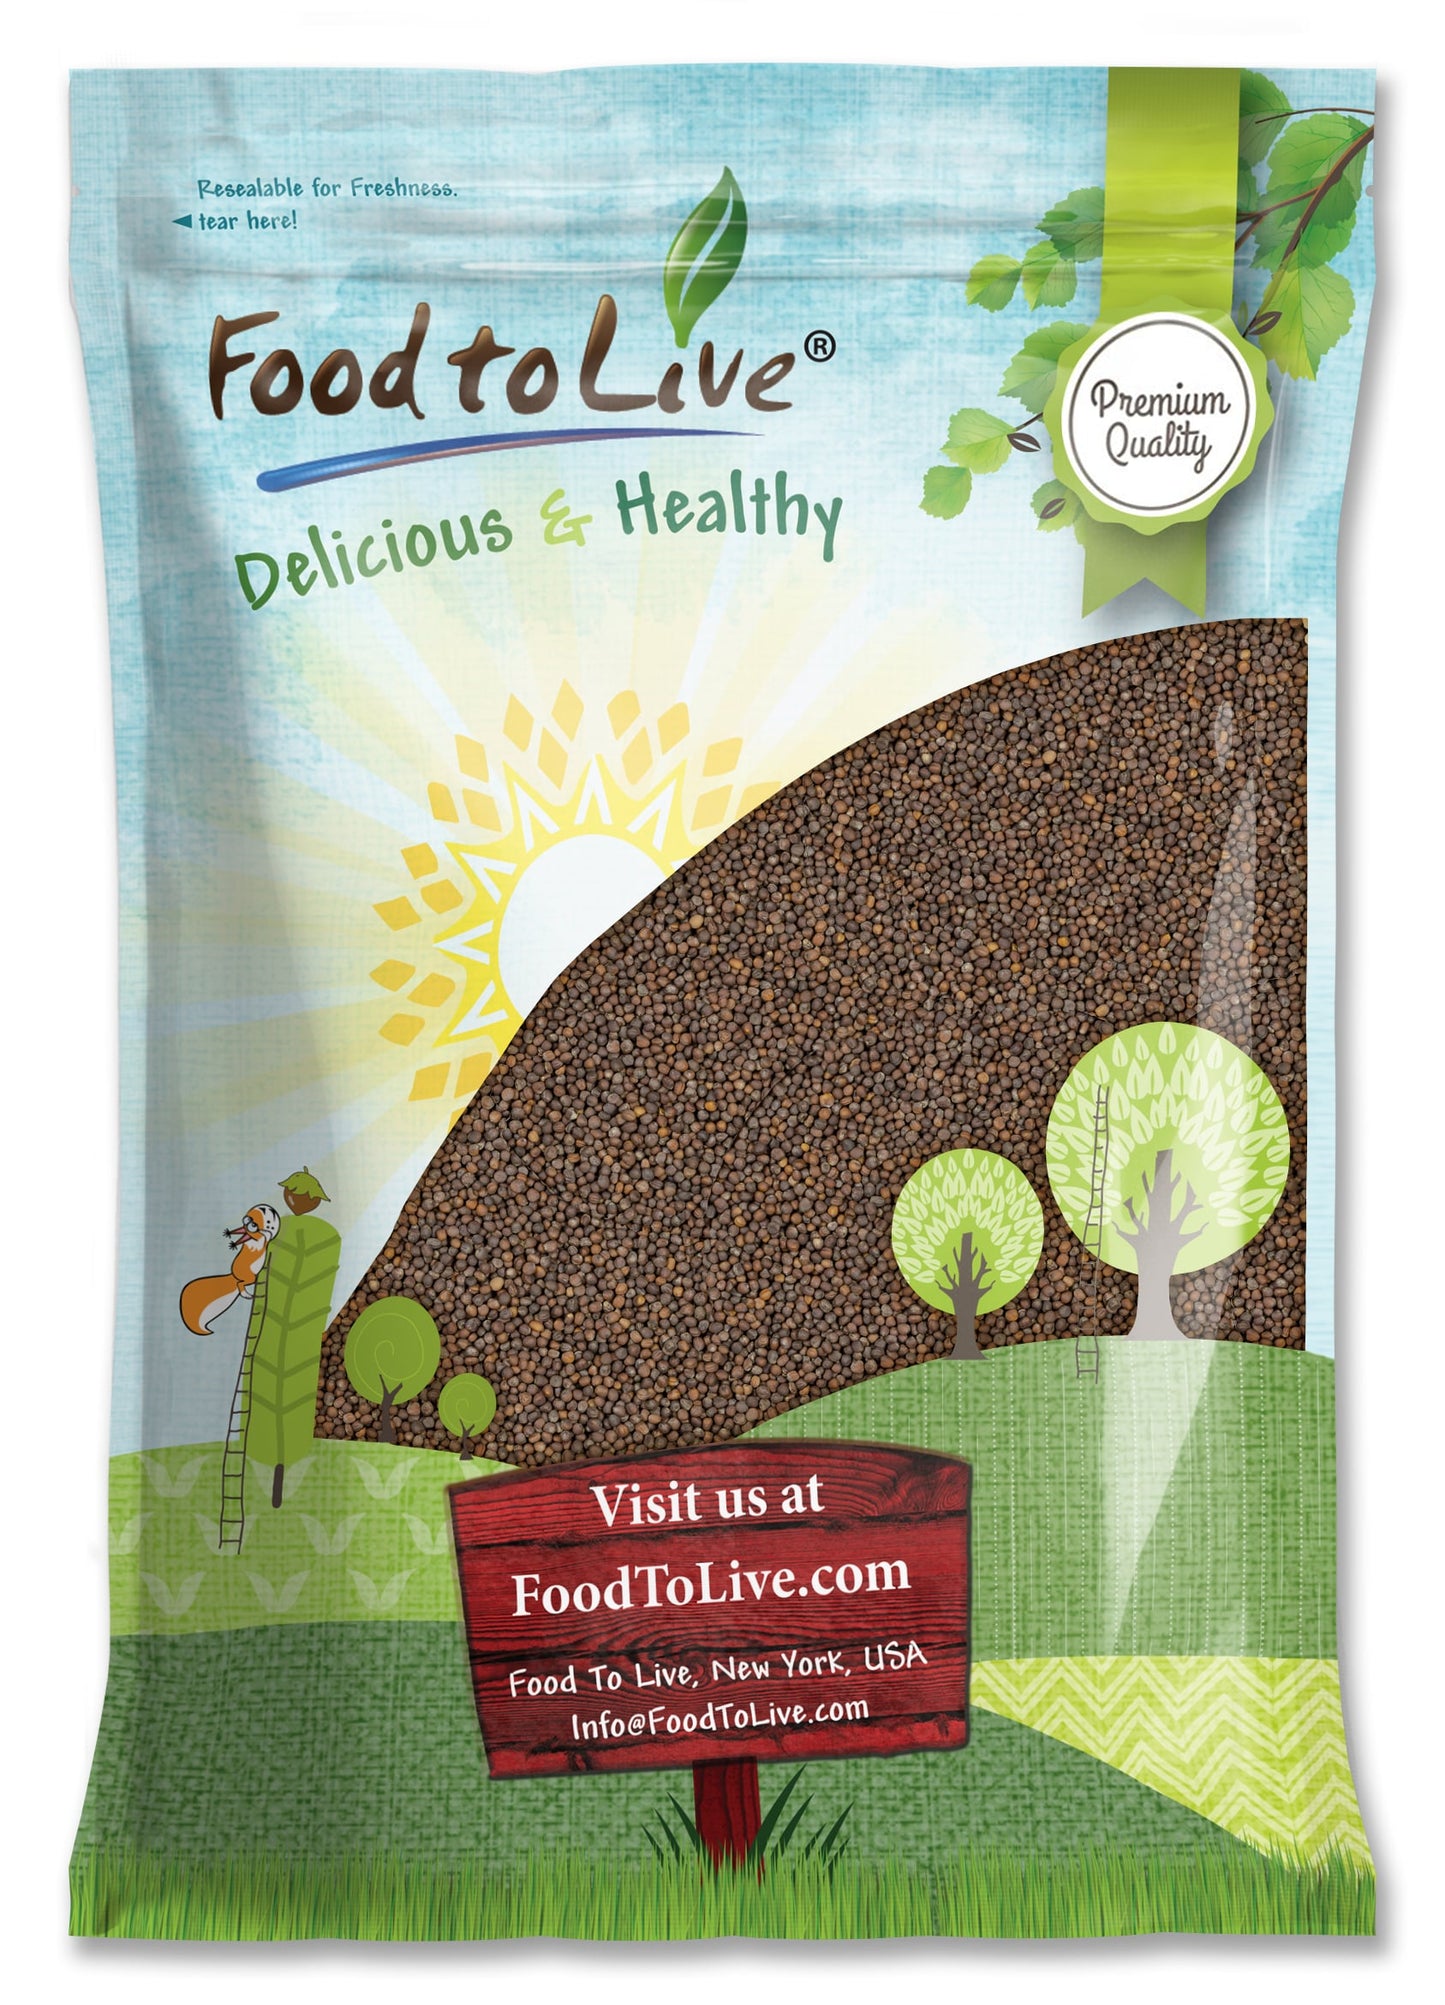 Kale Seeds — Non-GMO Verified, Great for Sprouting and Planting, High Germination Rate, Non-Irradiated, Kosher, Vegan Superfood, Sirtfood - by Food to Live